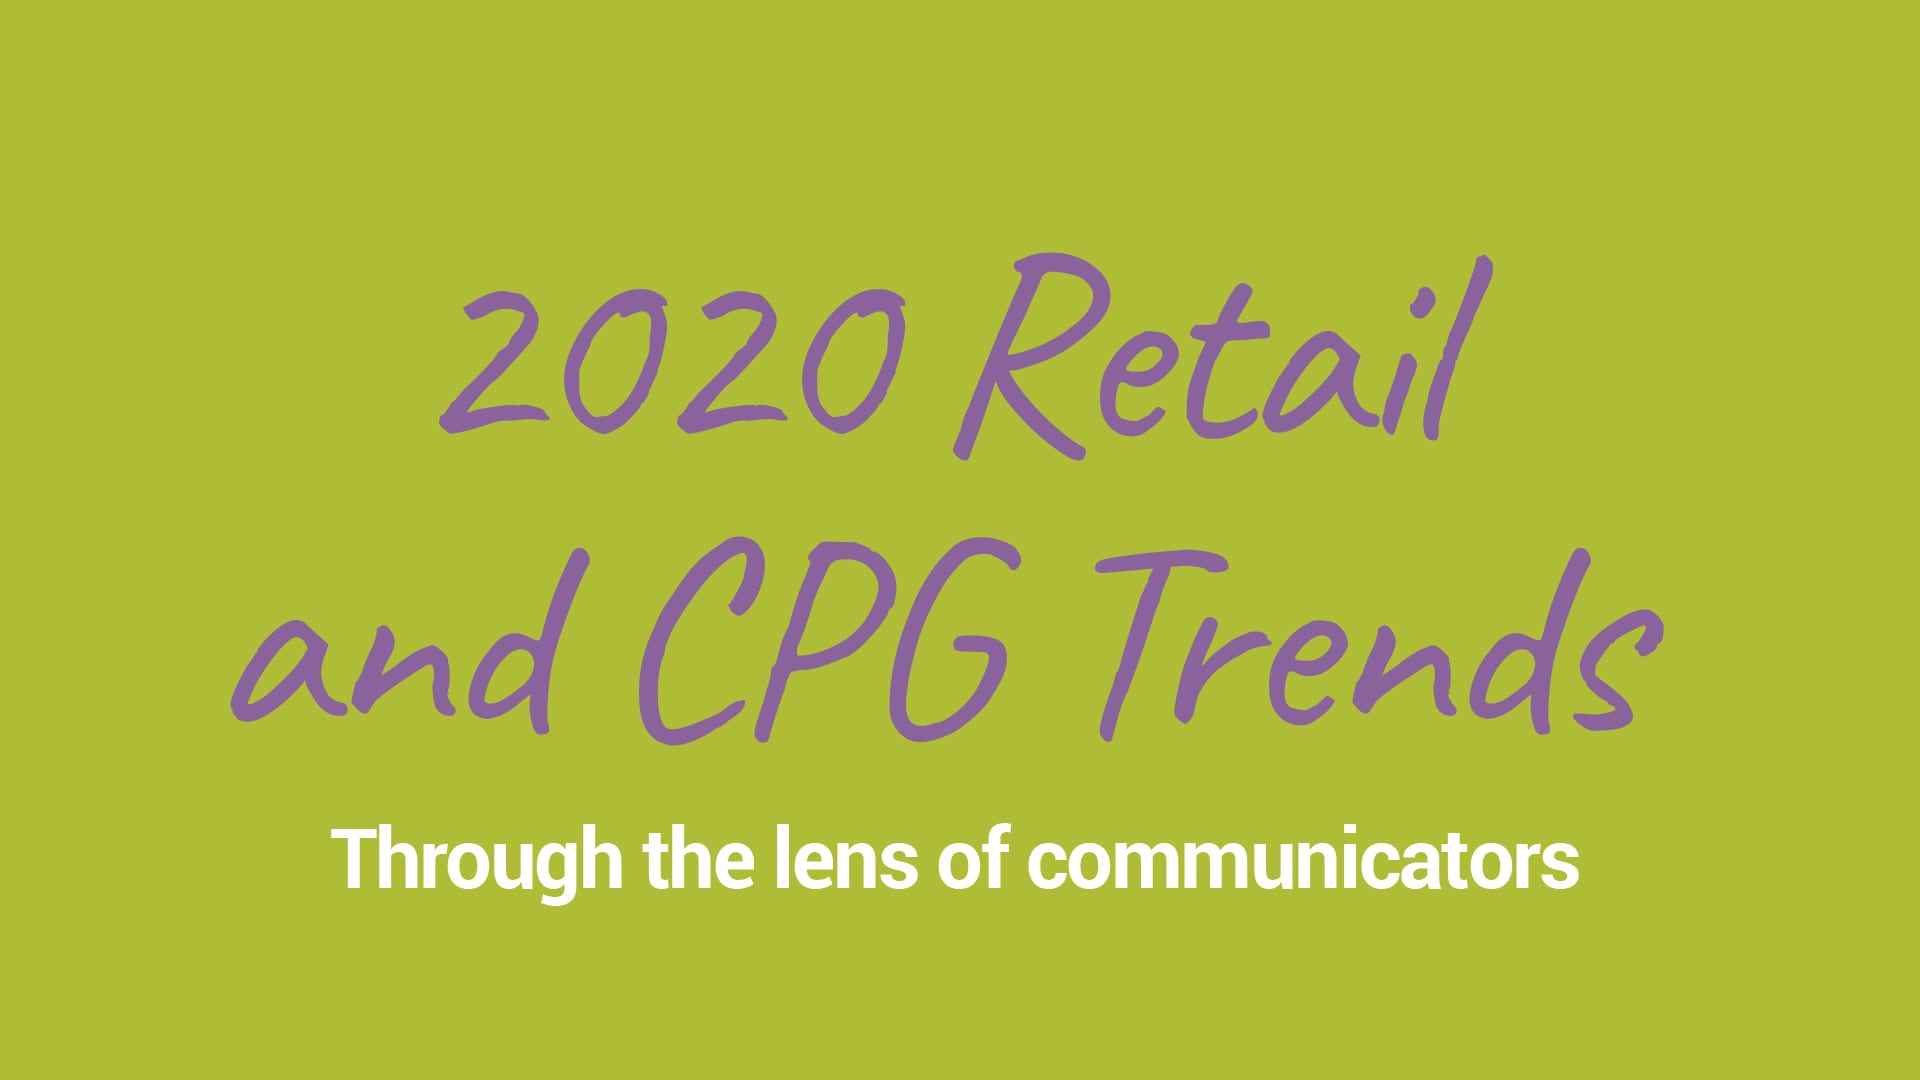 2020 Retail Trends